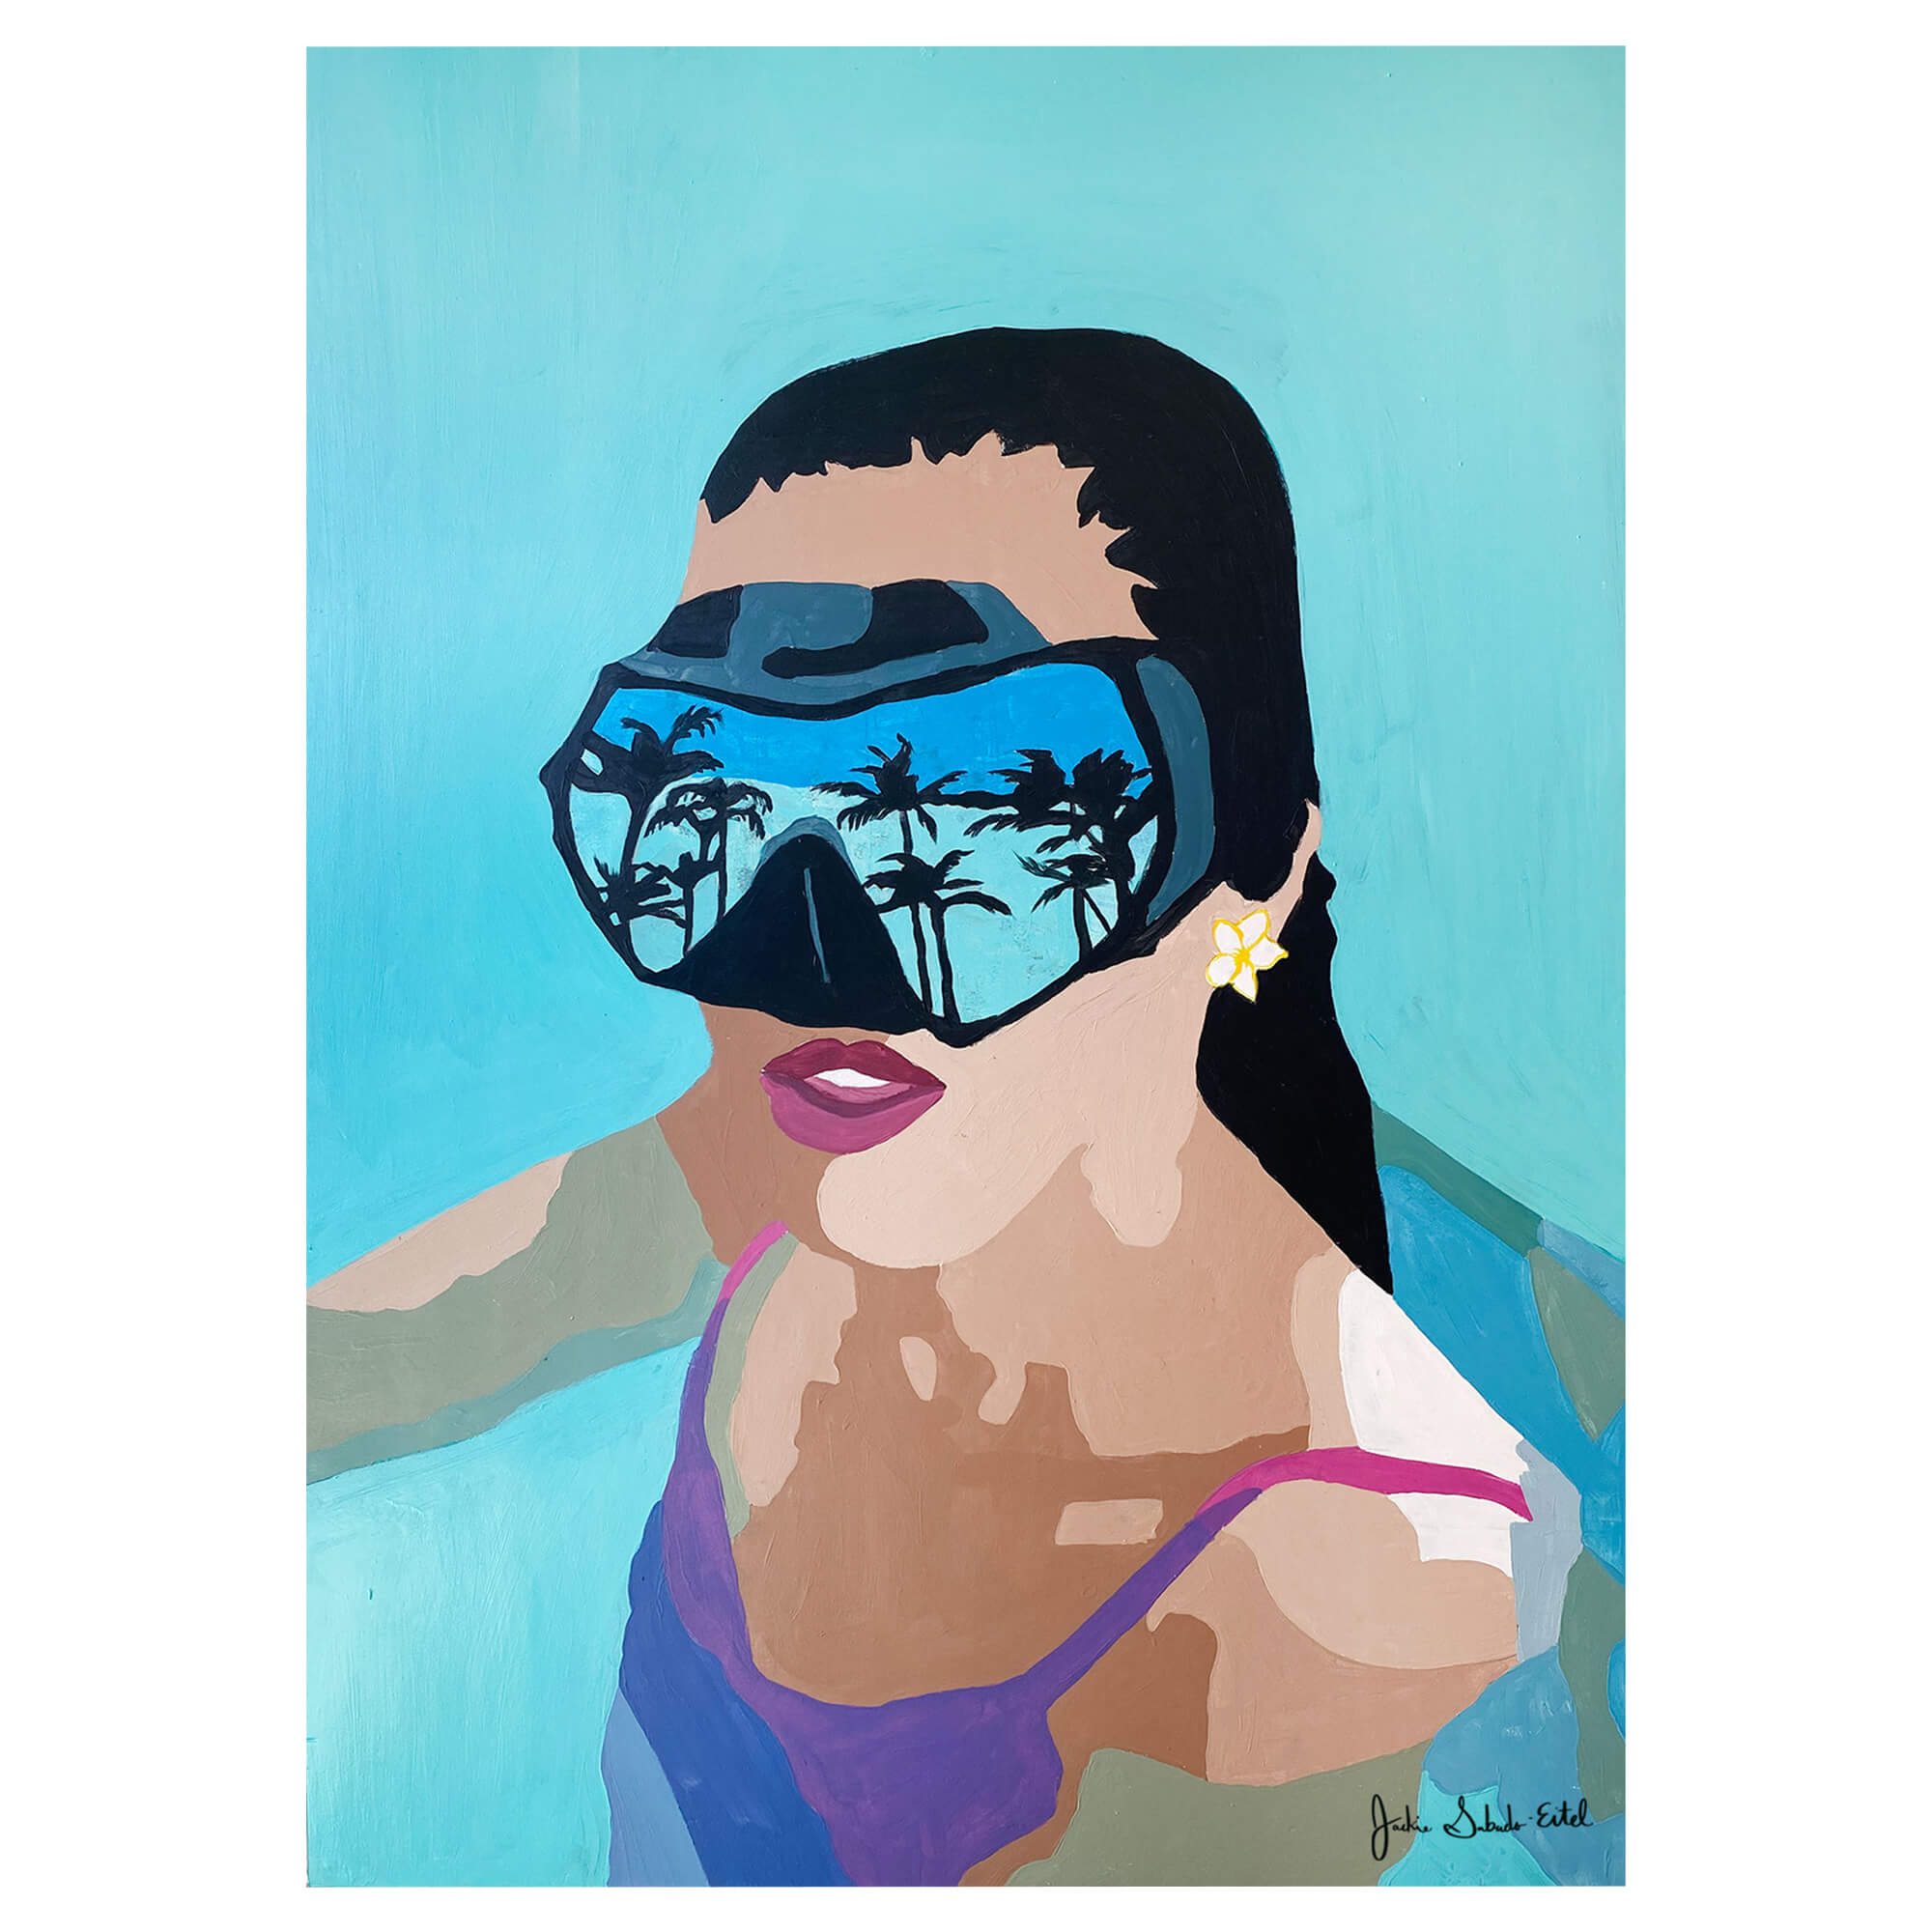 A matted art print featuring a portrait of a woman wearing goggles reflecting the tropical trees by Hawaii artist Jackie Eitel